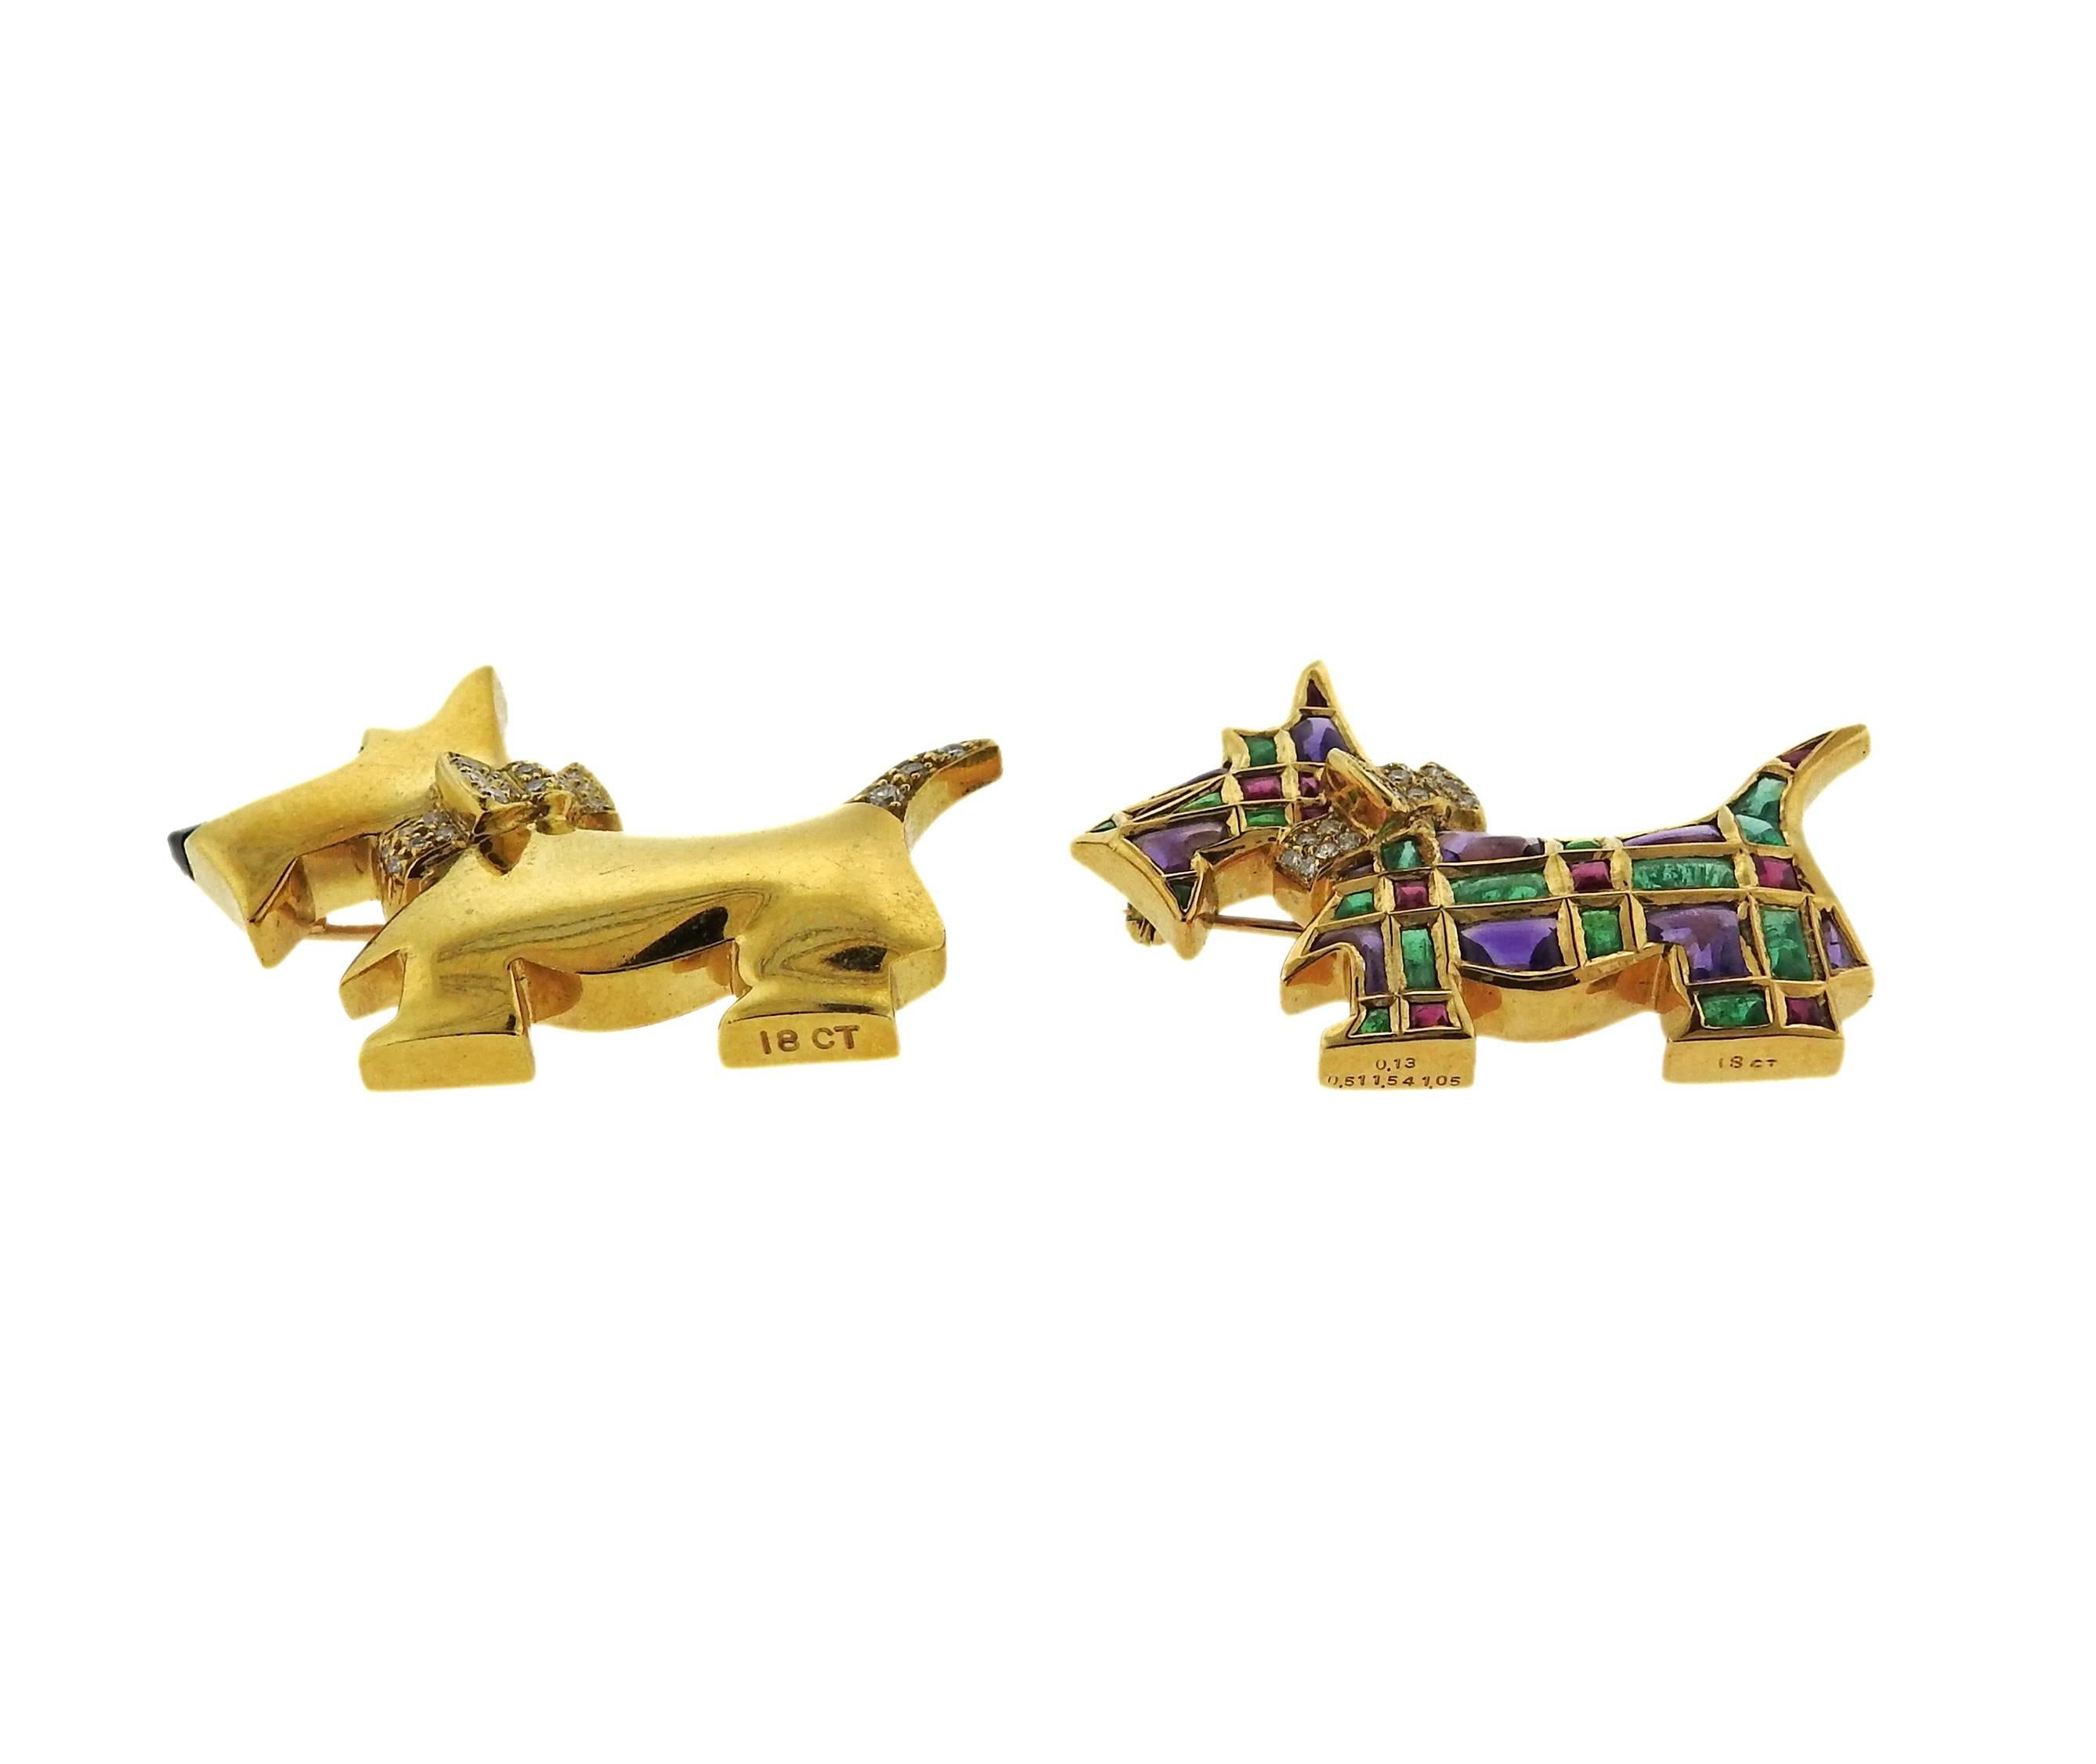 A pair of 2 westie dog brooches crafted from 18k gold featuring emeralds, rubies, and amethyst. Brooch with multi color stones measures 40mm x 29mm at widest point, other brooch measures 41mm X 31mm. Marked 18CT; 0.13; 0.51; 1.54; 1.05. Weight is